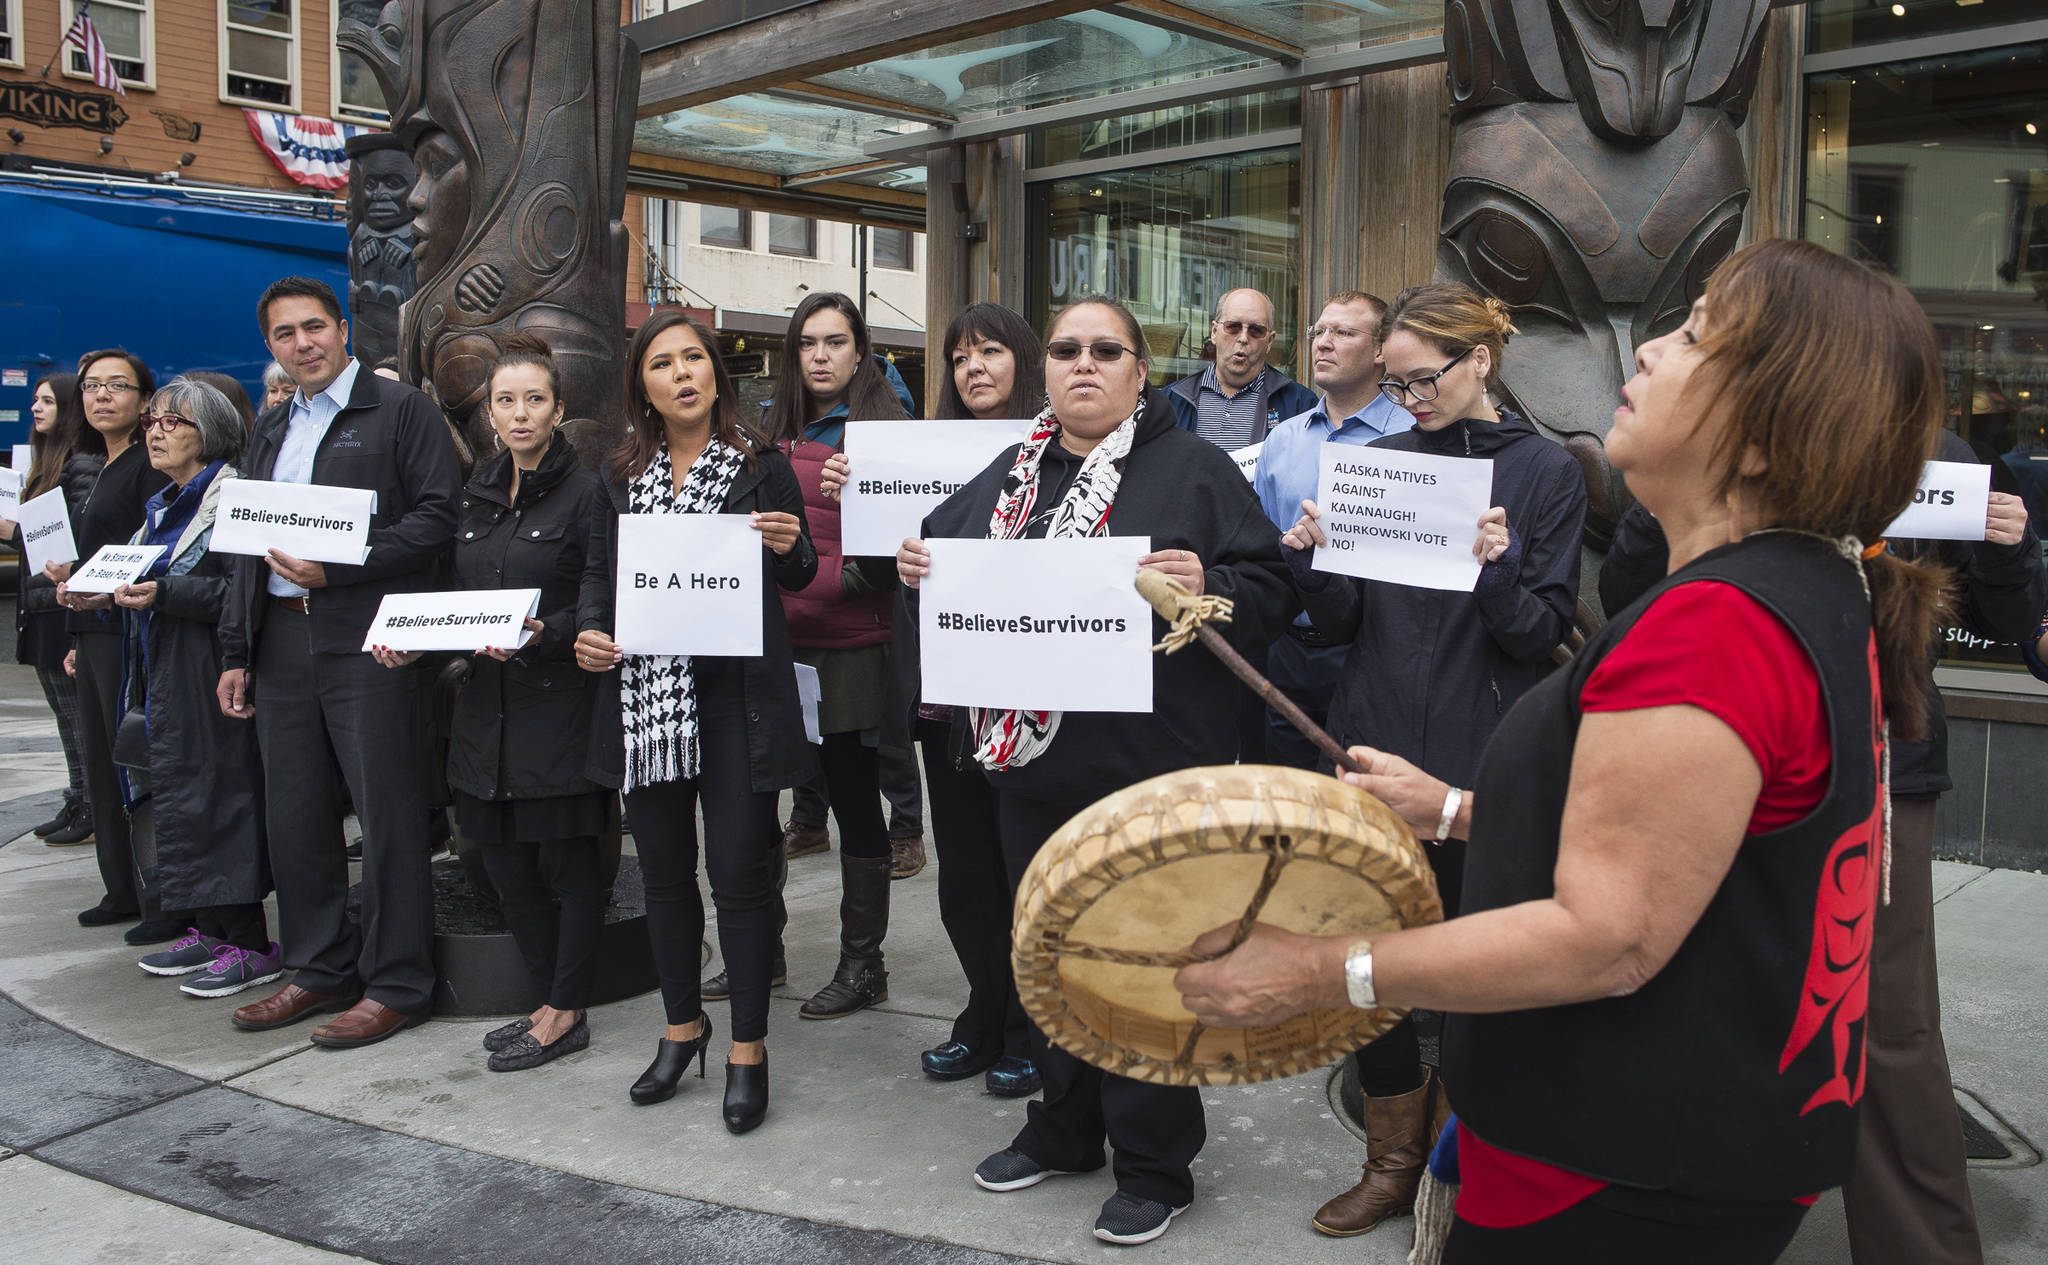 Nancy Barnes drums as about 30 people from the Walter Soboleff Center and Sealaska Corporation stand Monday, Sept. 24, 2018, in support of victims of sexual violence. The National Walk Out was in support of Dr. Christine Blasey Ford and Deborah Ramirez in their statements of being sexually assaulted by Supreme Court nominee Brett Kavanaugh decades ago. Supporters were asked to dress in black and photograph themselves for social media using #BelieveSurvivors at 1 p.m. Eastern Time on Wednesday. (Michael Penn | Juneau Empire)